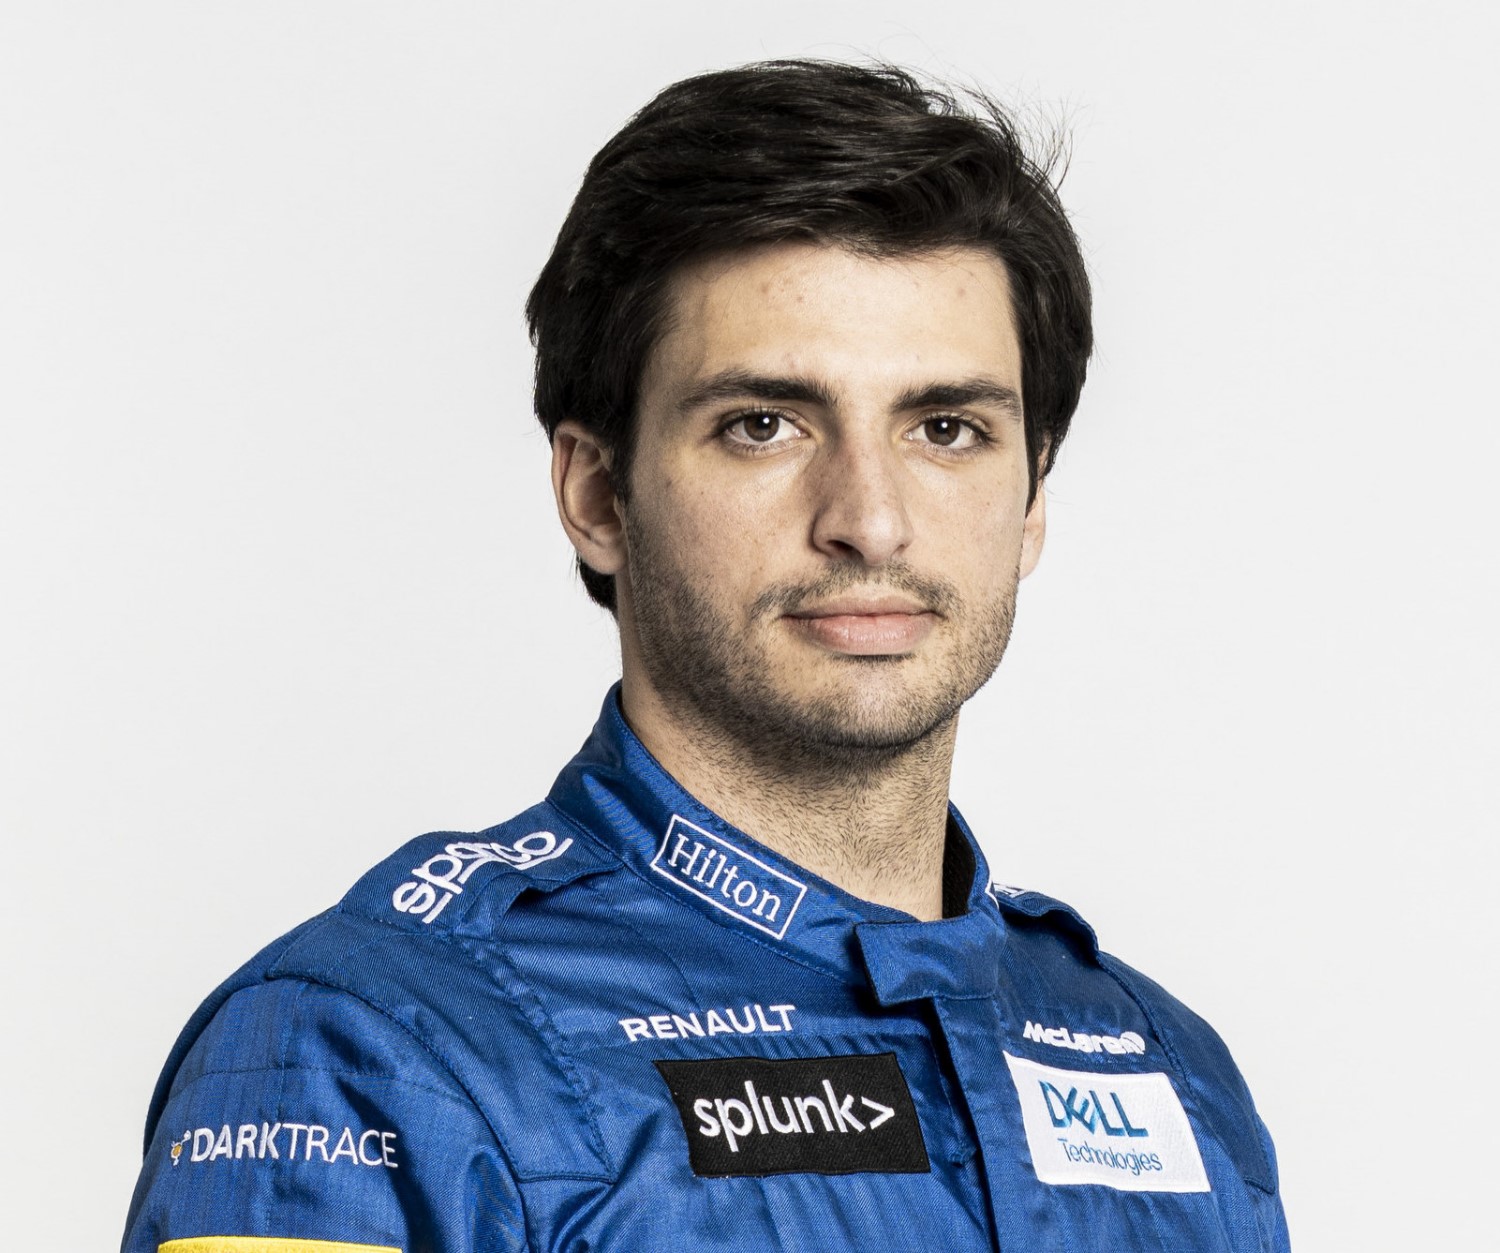 Sainz Jr. expected to double his salary